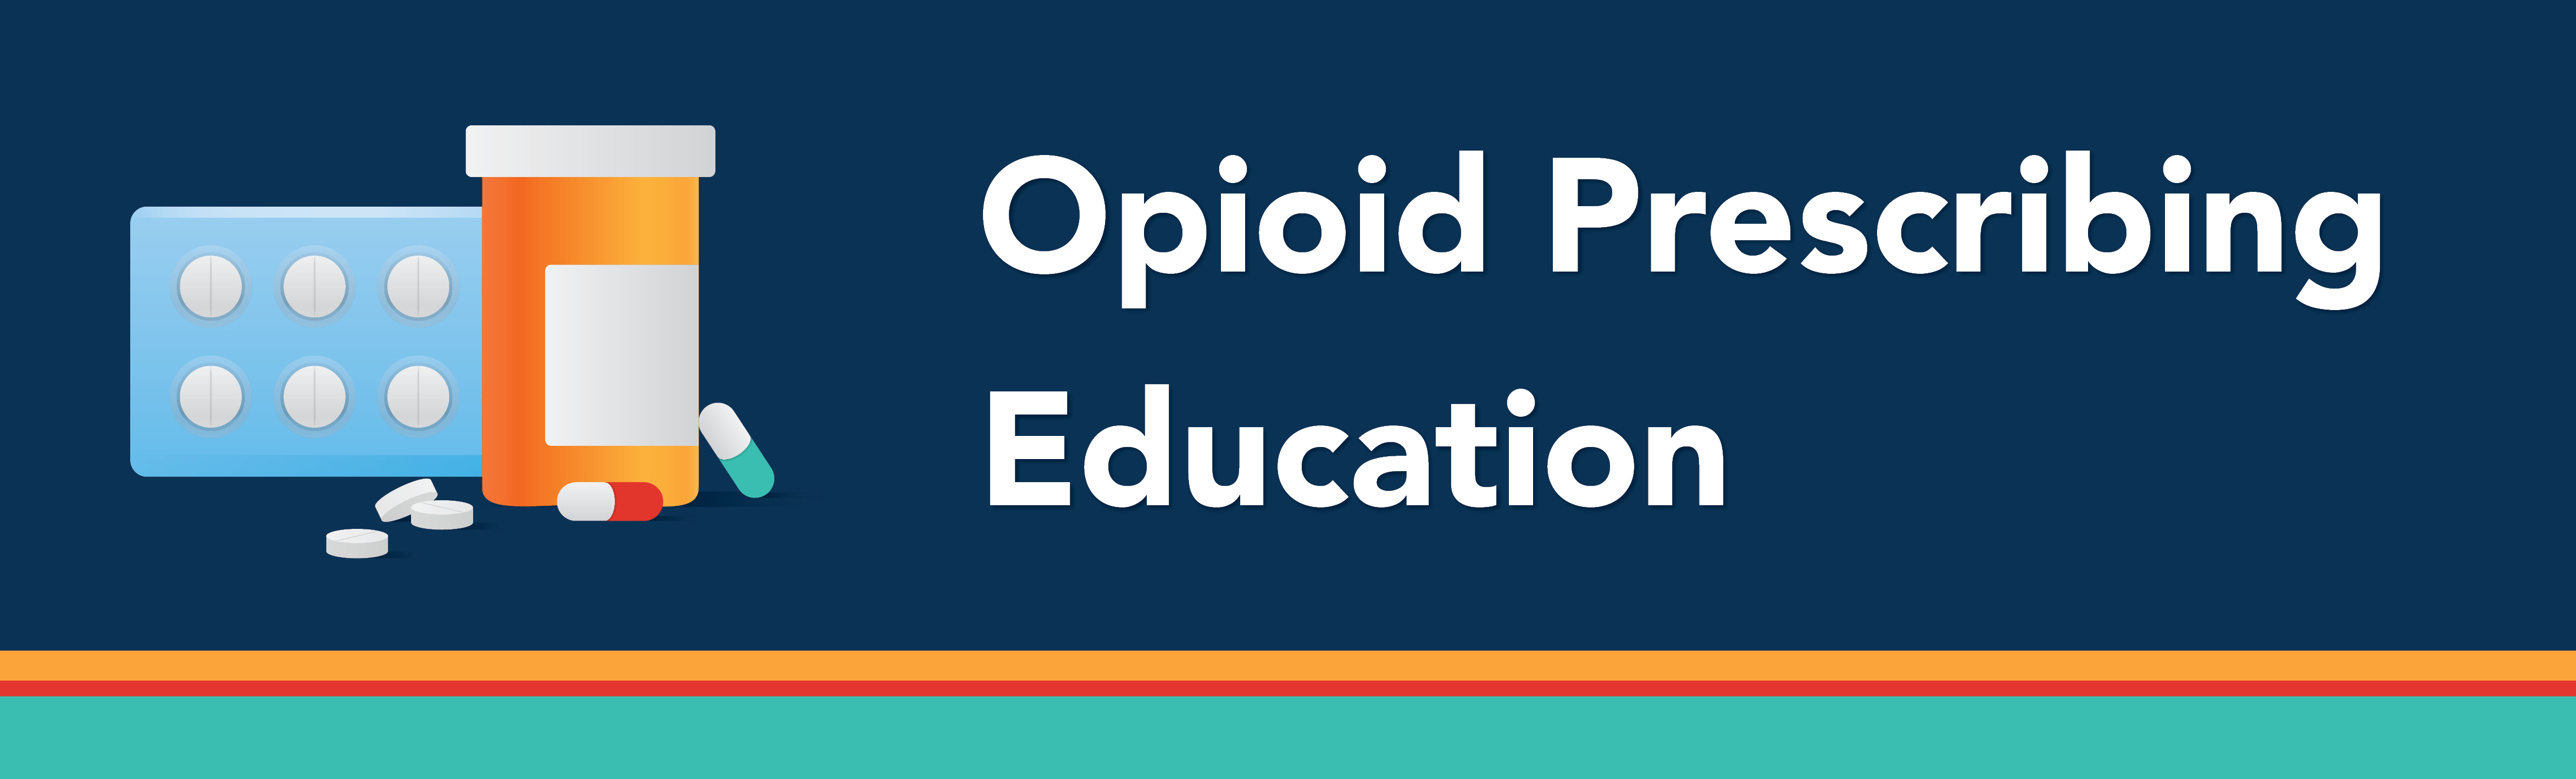 MEB-Approved Opioid Prescribing Series